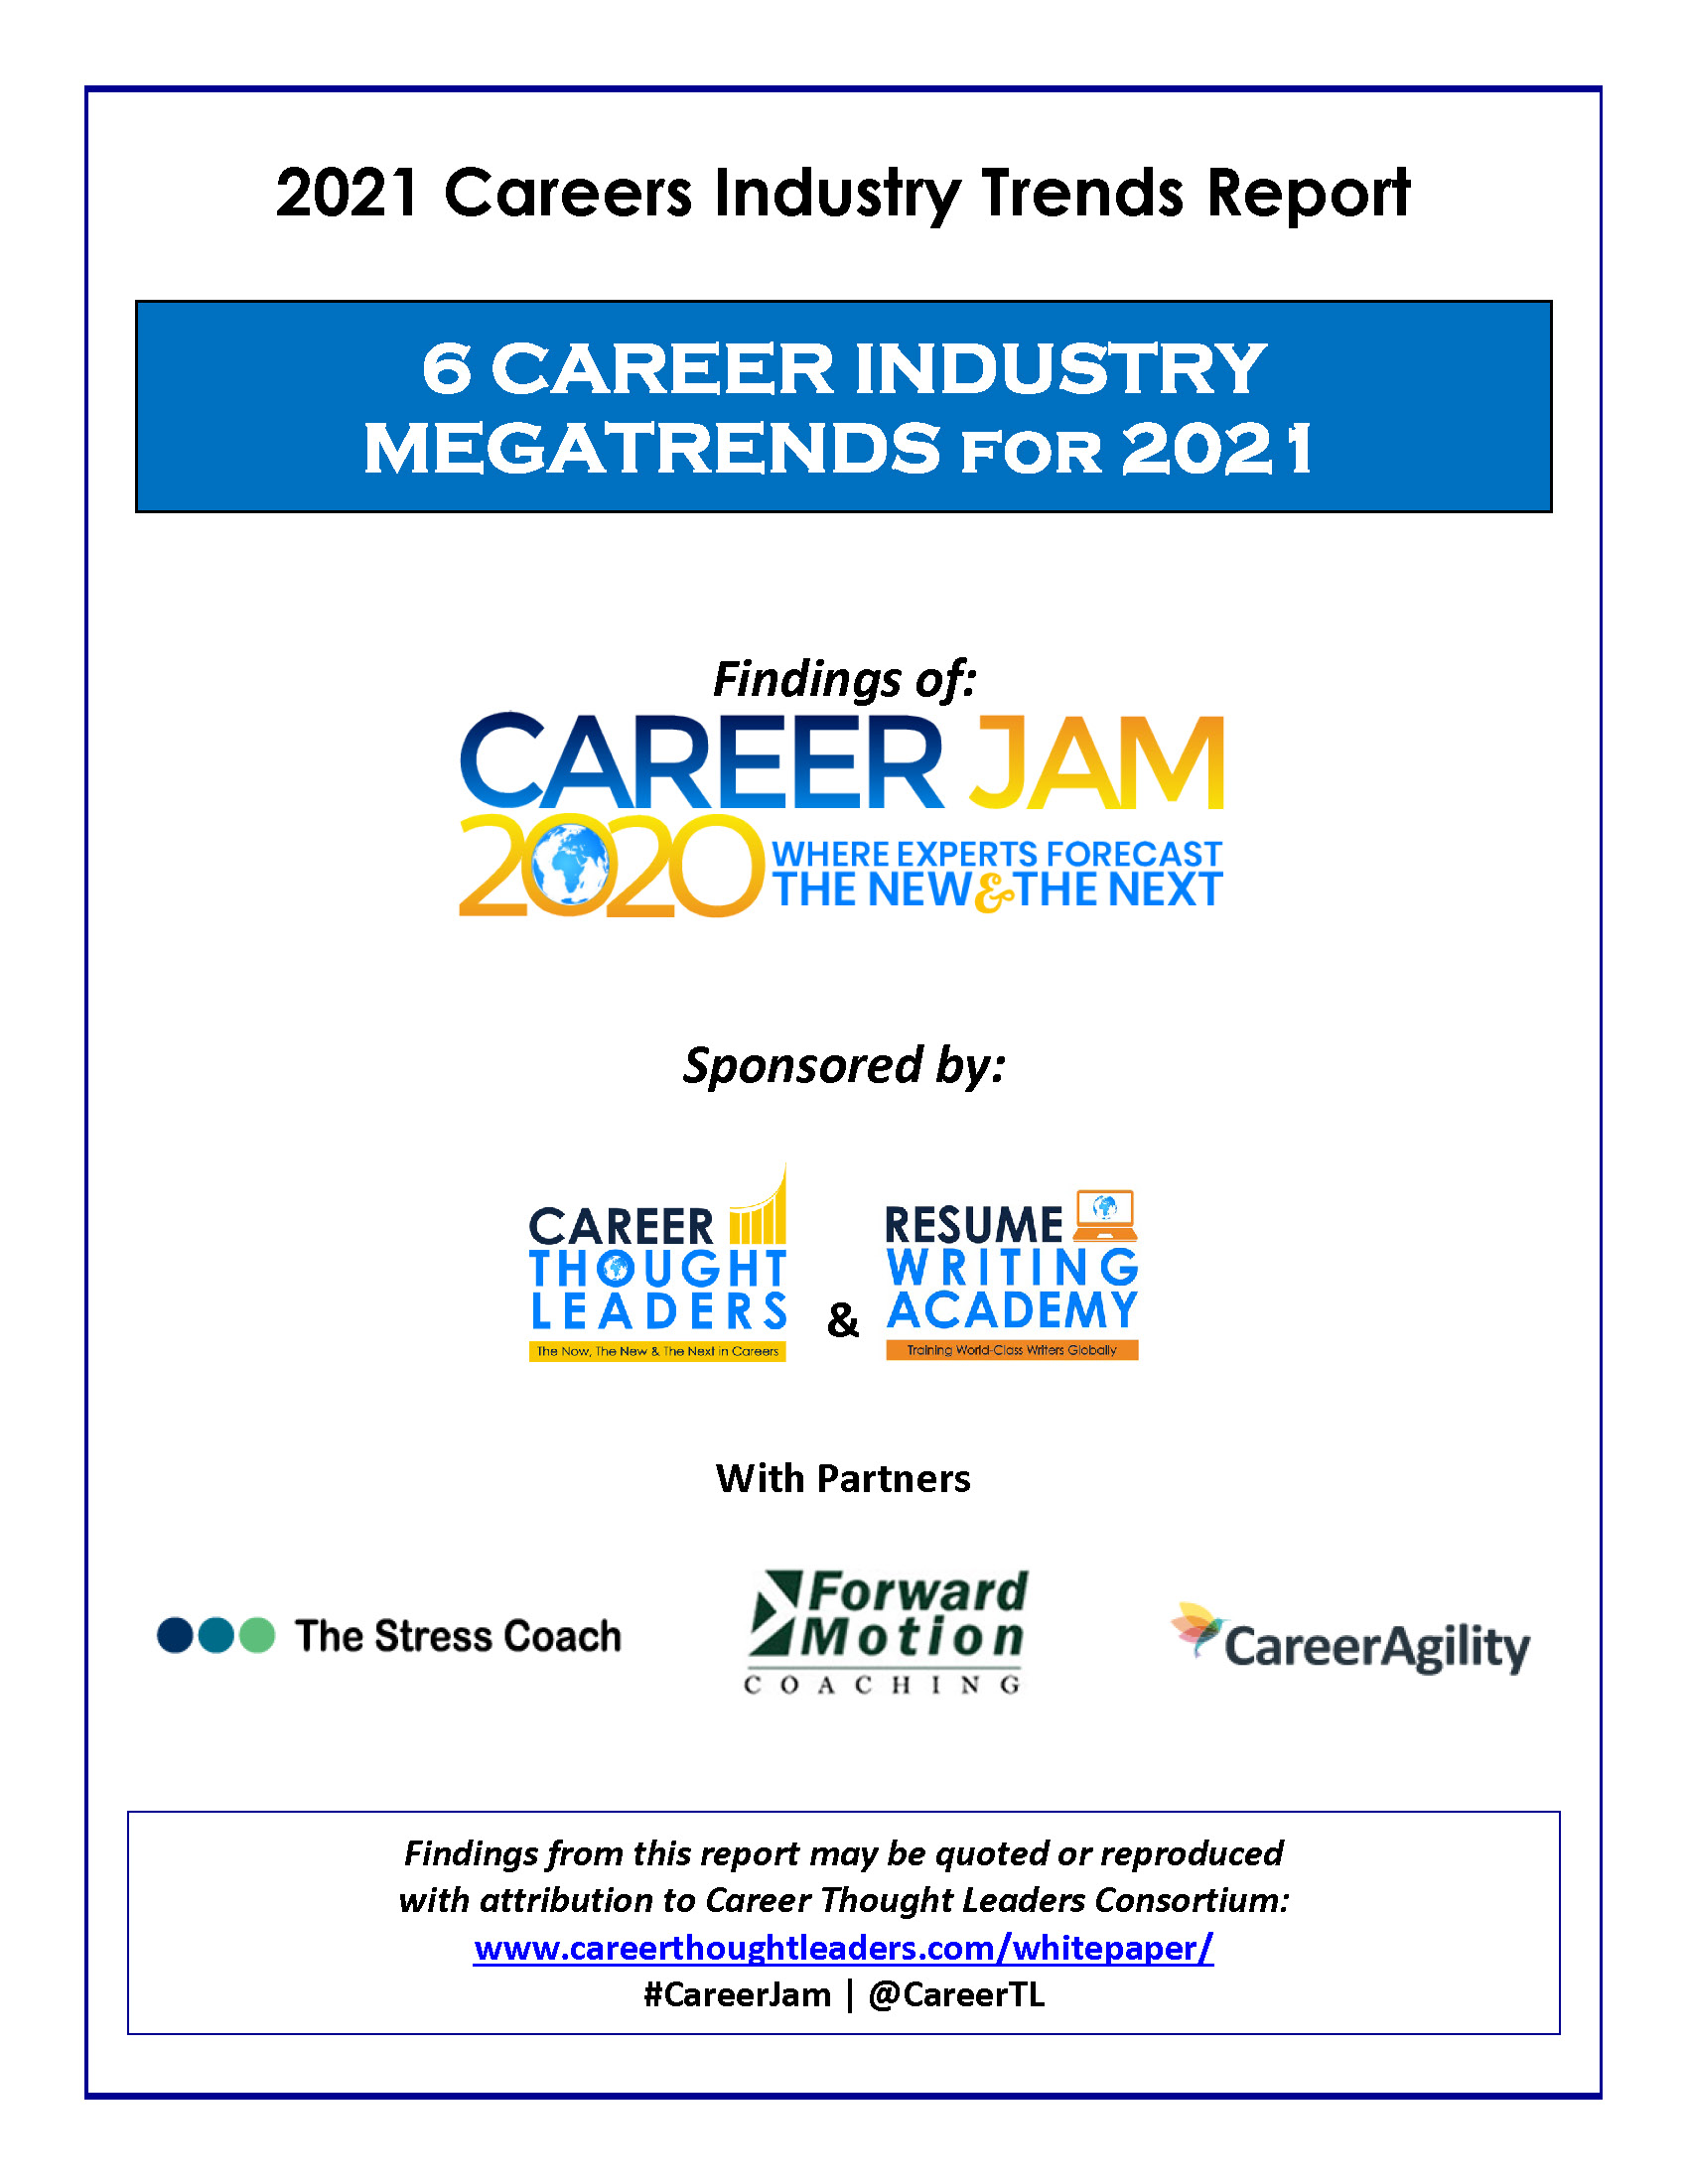 2021 Career Industry Trends Report Cover